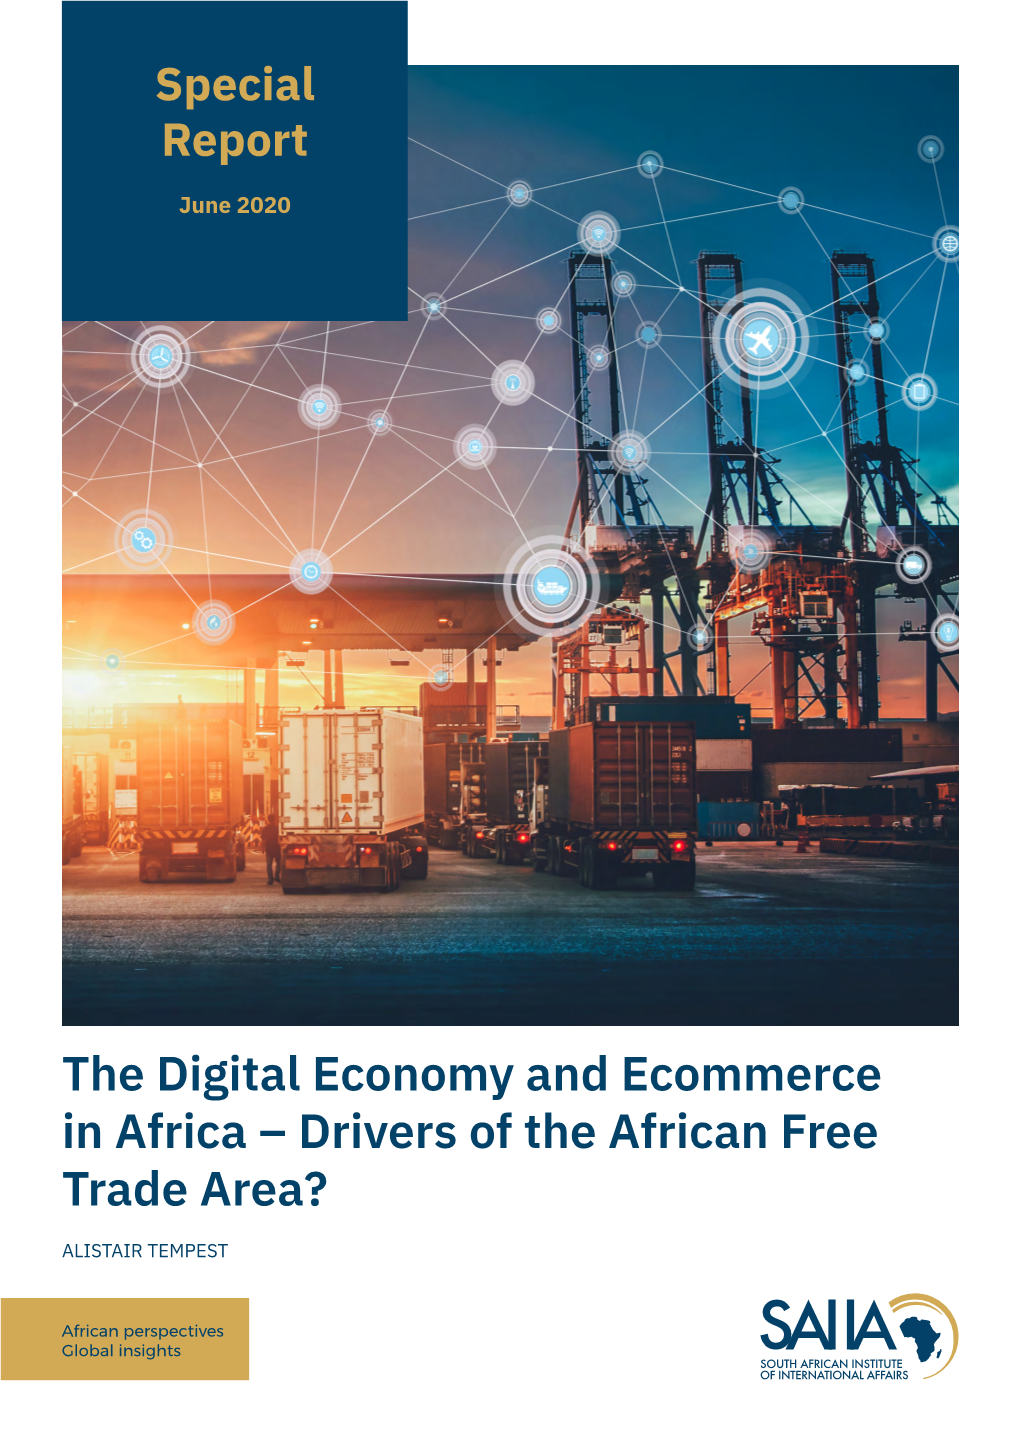 The Digital Economy and Ecommerce in Africa – Drivers of the African Free Trade Area?